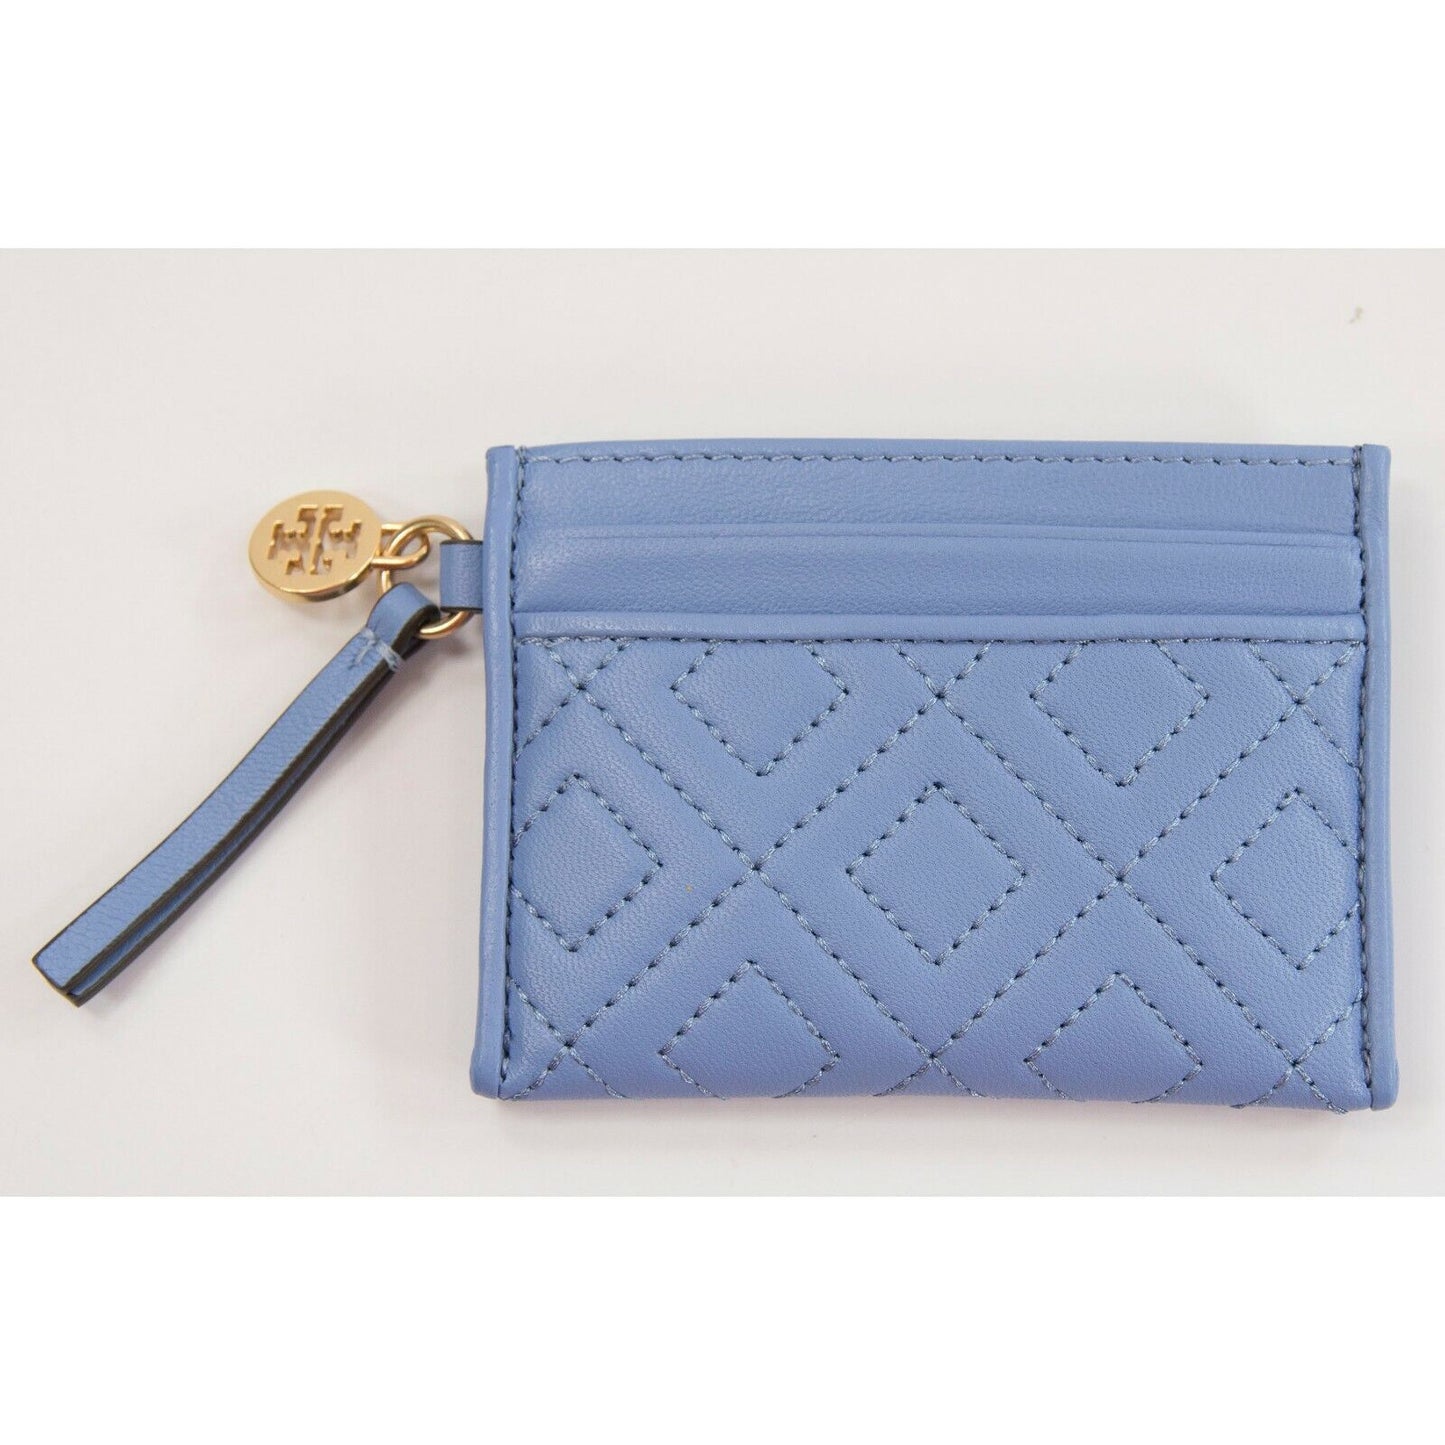 Tory Burch Fleming Larkspur Quilted Leather Card Coin Case Mini Key Wallet NWT